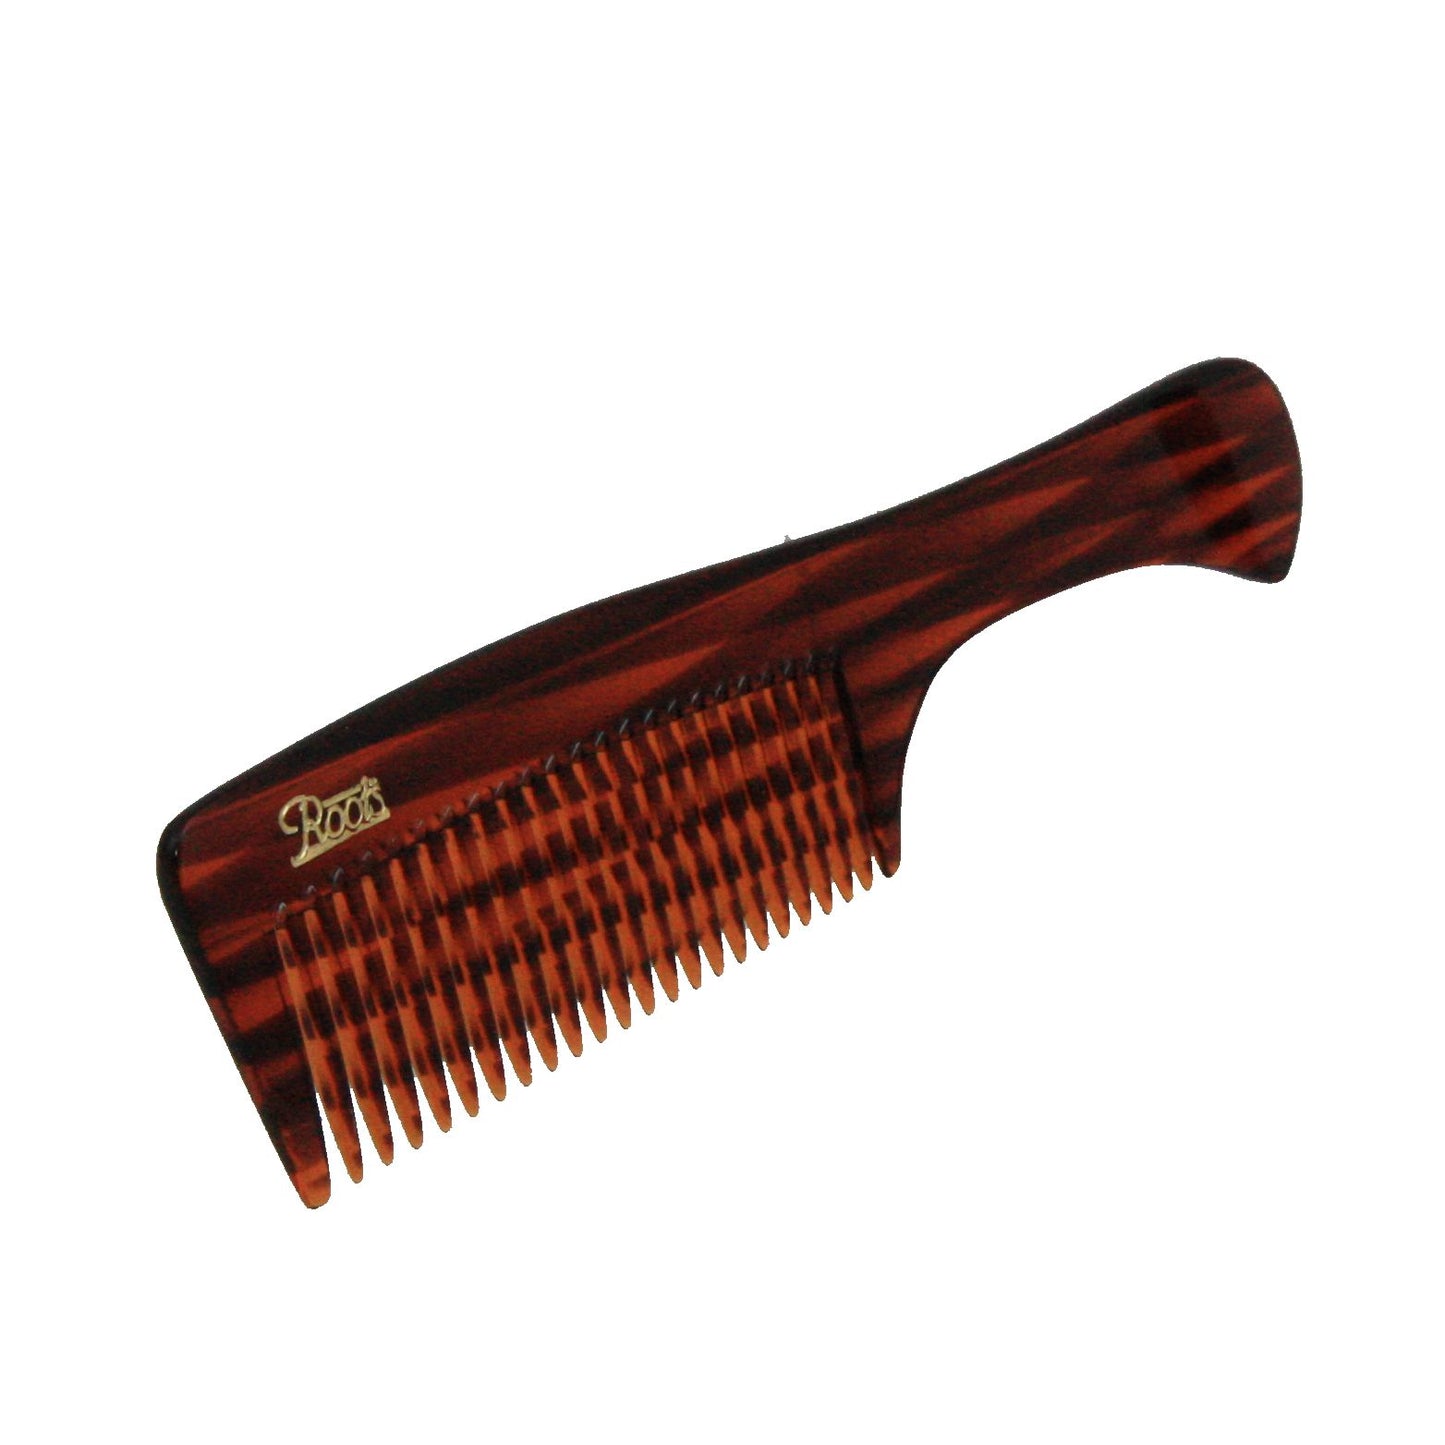 8.5in Roots/Ace Cellulose Acetate Handle Comb - Clearance